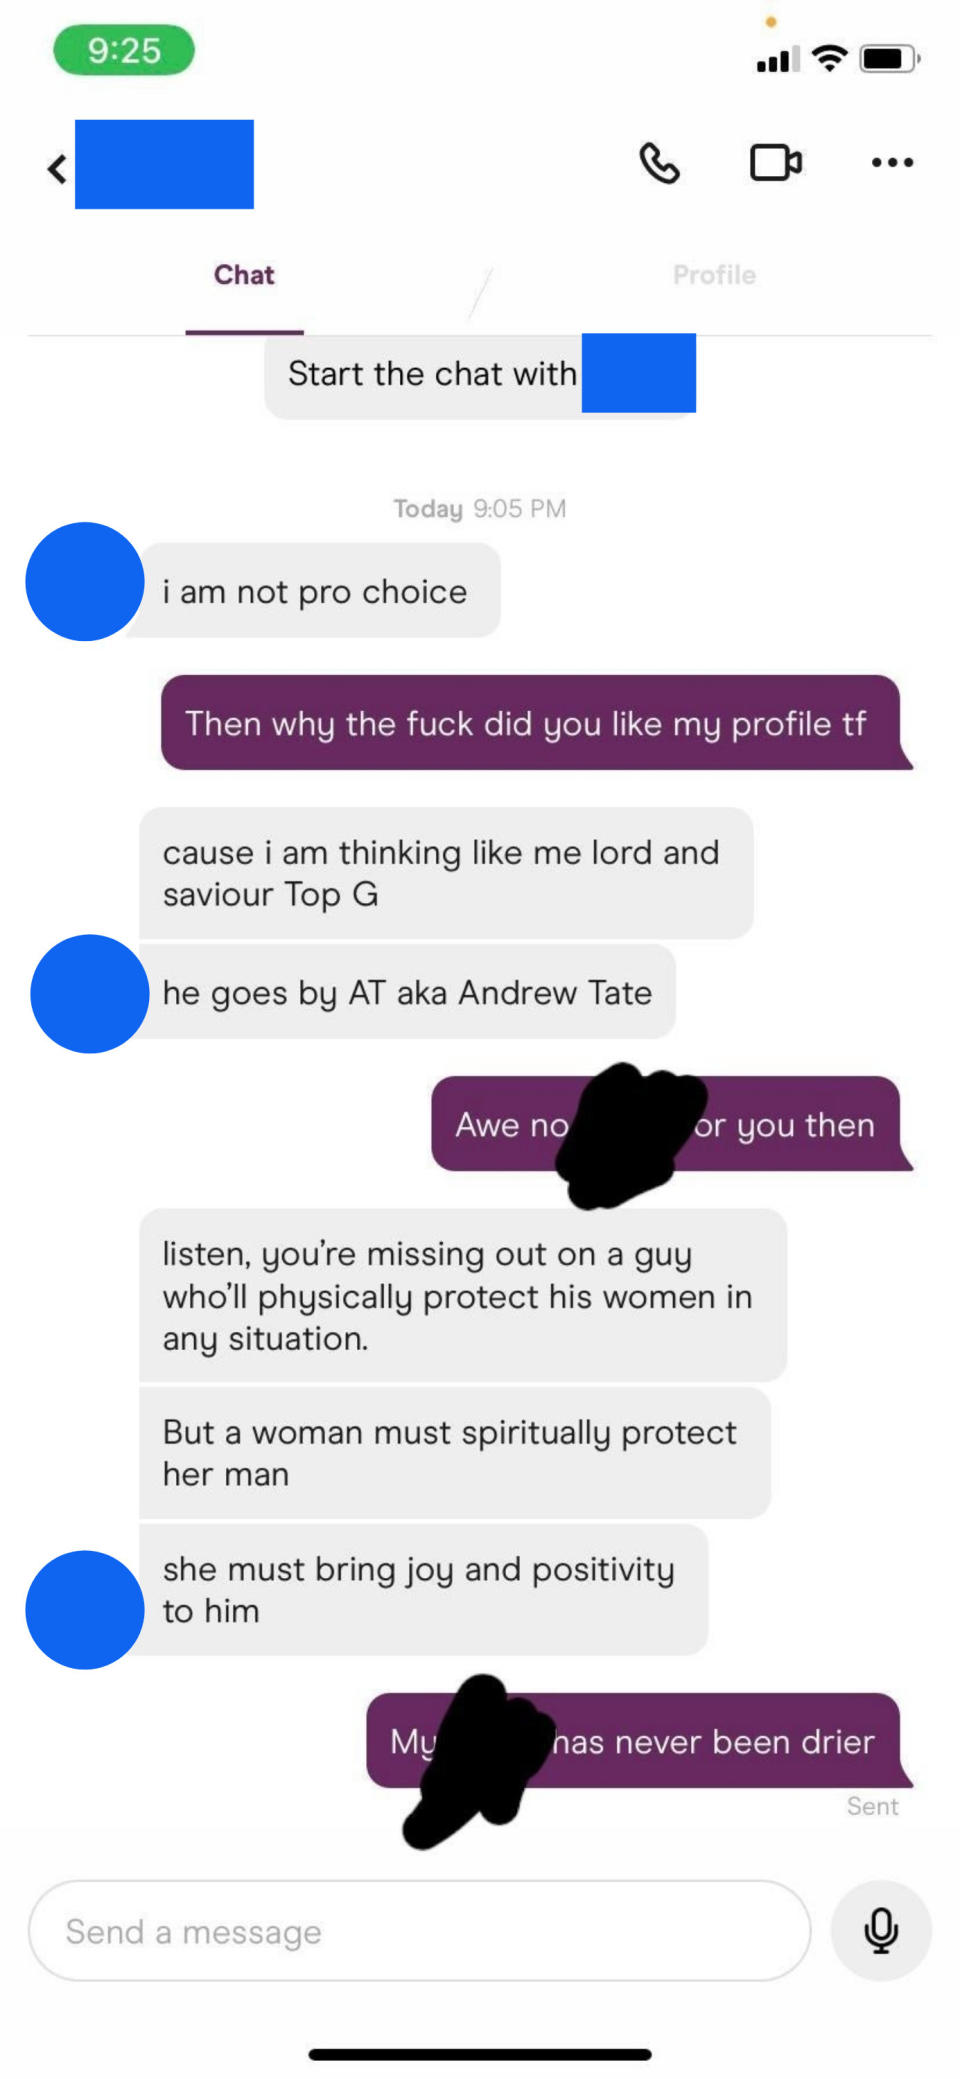 He says "I'm not pro choice," and when she asks why he liked her profile, he says because he's thinking like his "lord and savior, Andrew Tate," and says she's missing out on a guy who'll "physically protect his woman"